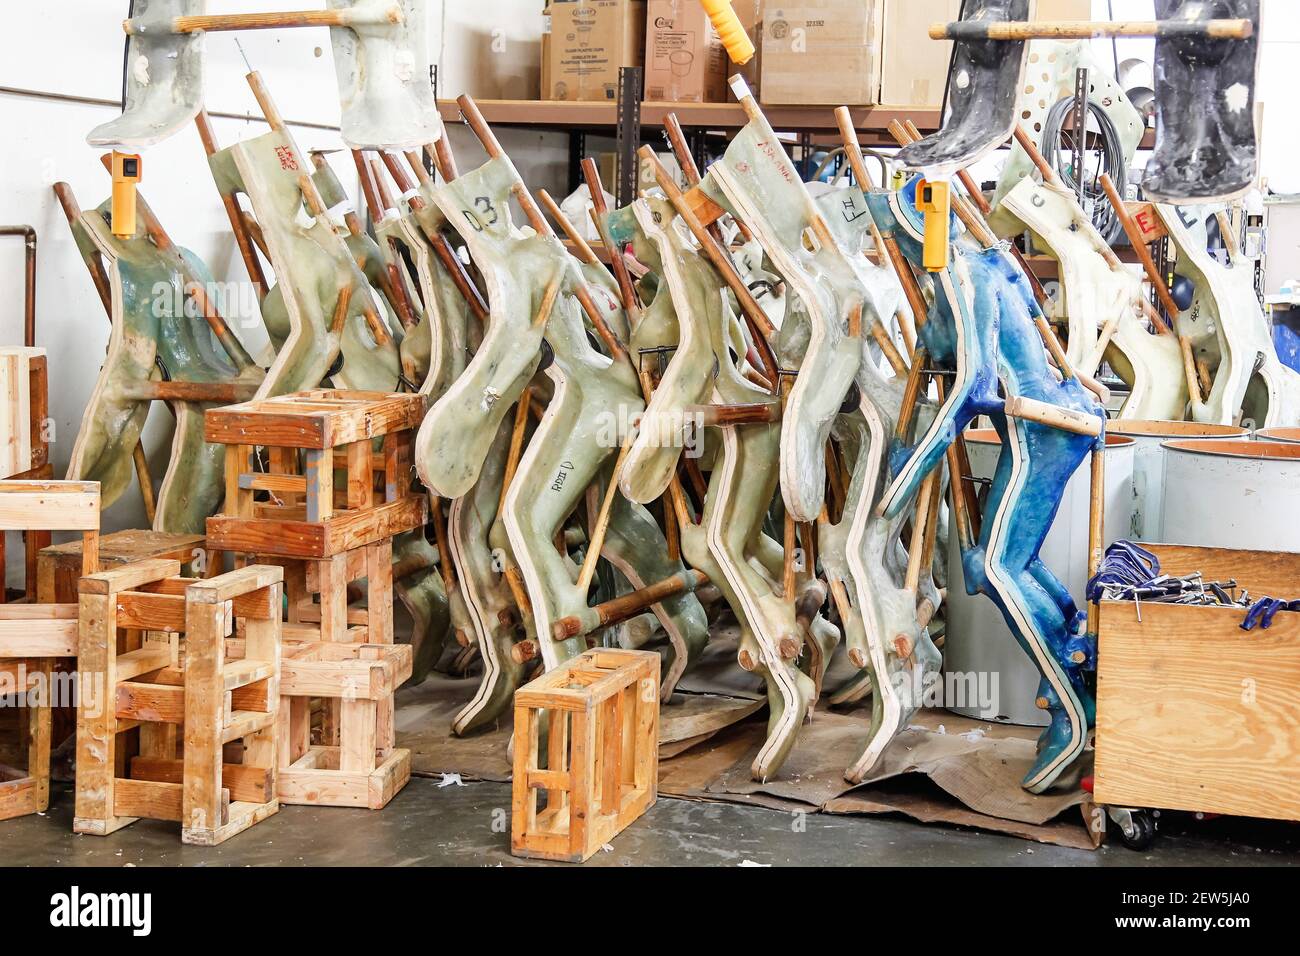 These are molds used to make Real Doll bodies at the Abyss Creations factory on Tuesday in San Marcos, California